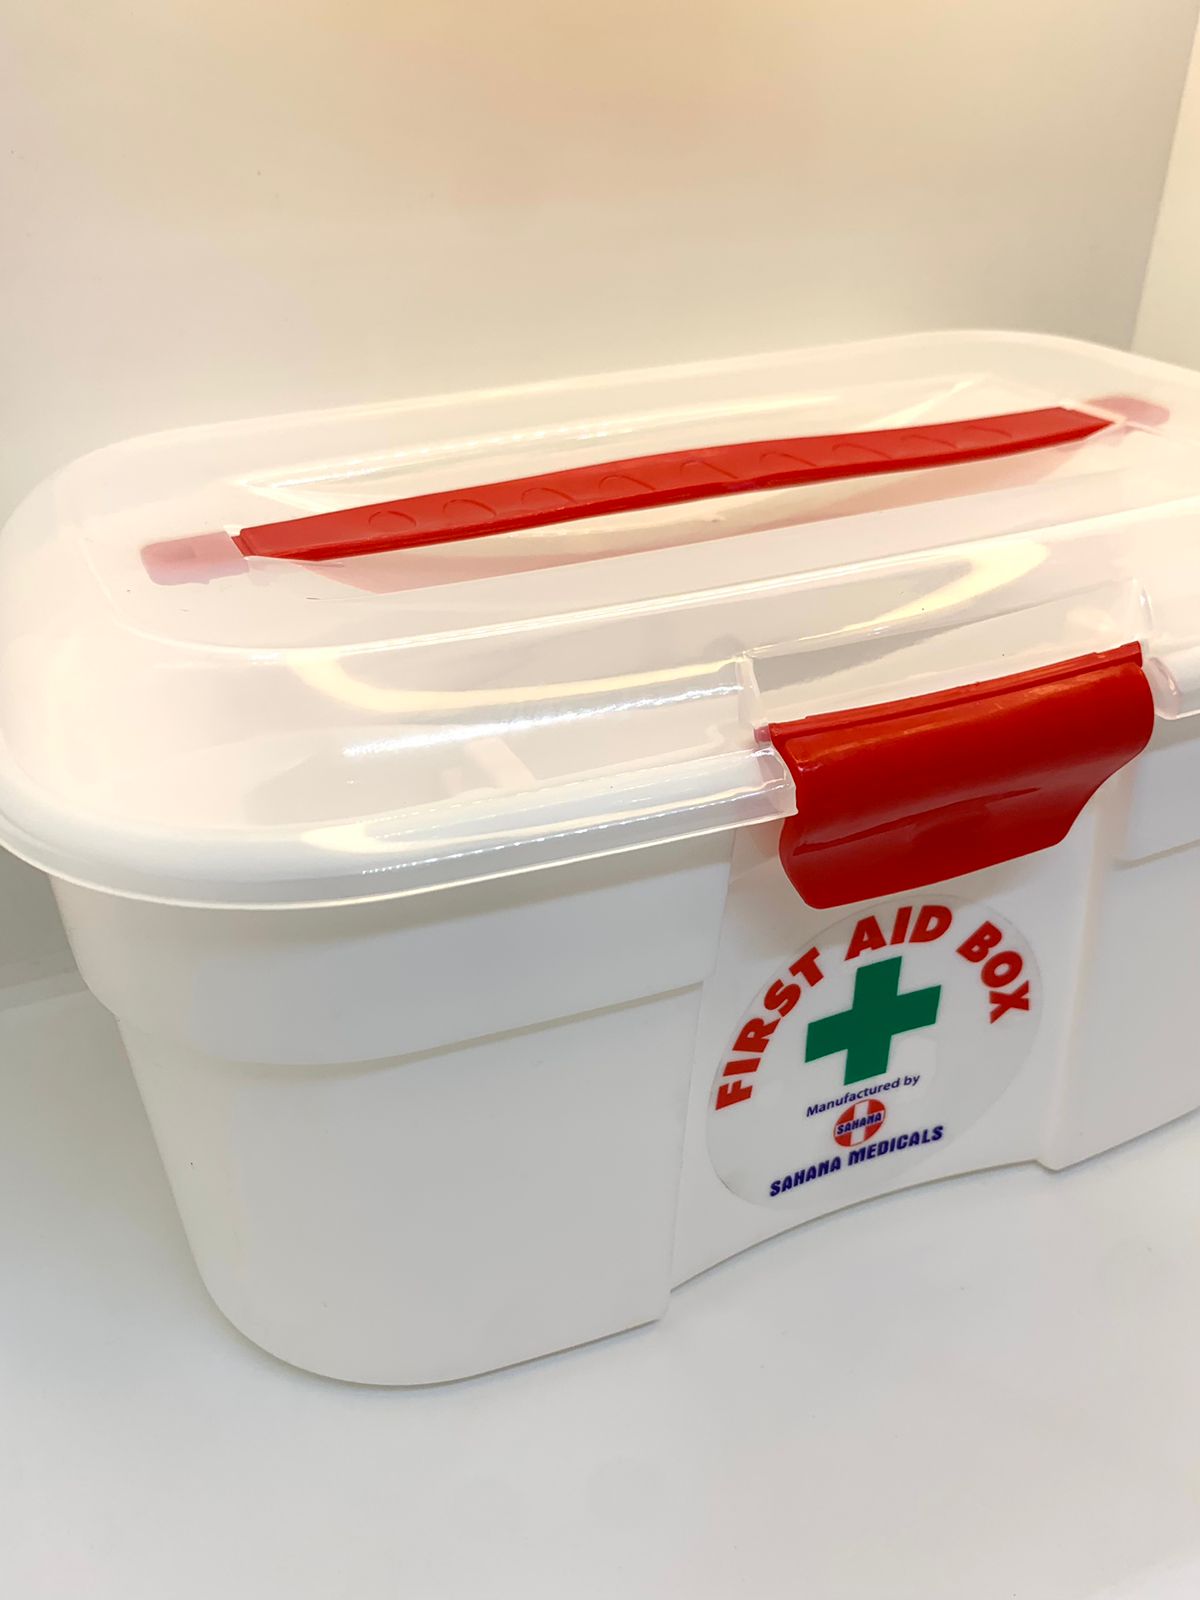 First Aid Box - Large Size - The Shopping Kingdom